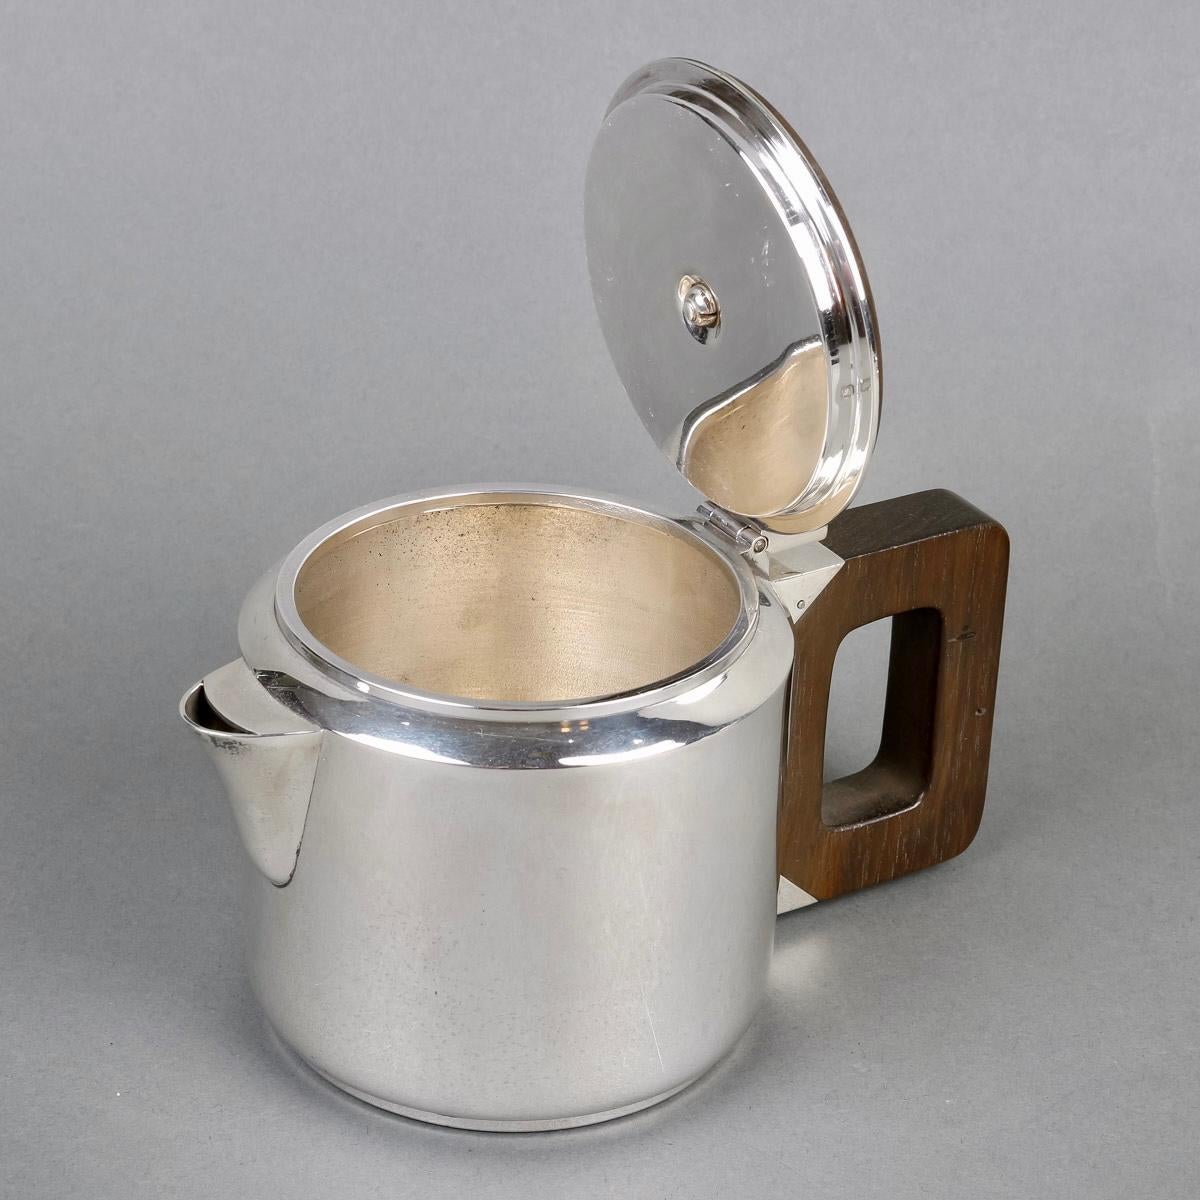 Art Deco Modernist tea and coffee egoiste set in sterling pure silver and rosewood by Jean E. Puiforcat created in the 1930s.

Service including:
- a coffee pot : 9 cm x 9 cm
- a teapot : 8 cm x 10 cm
- a milkpot : 5.5 cm x 5.5 cm
- a sugar pot :